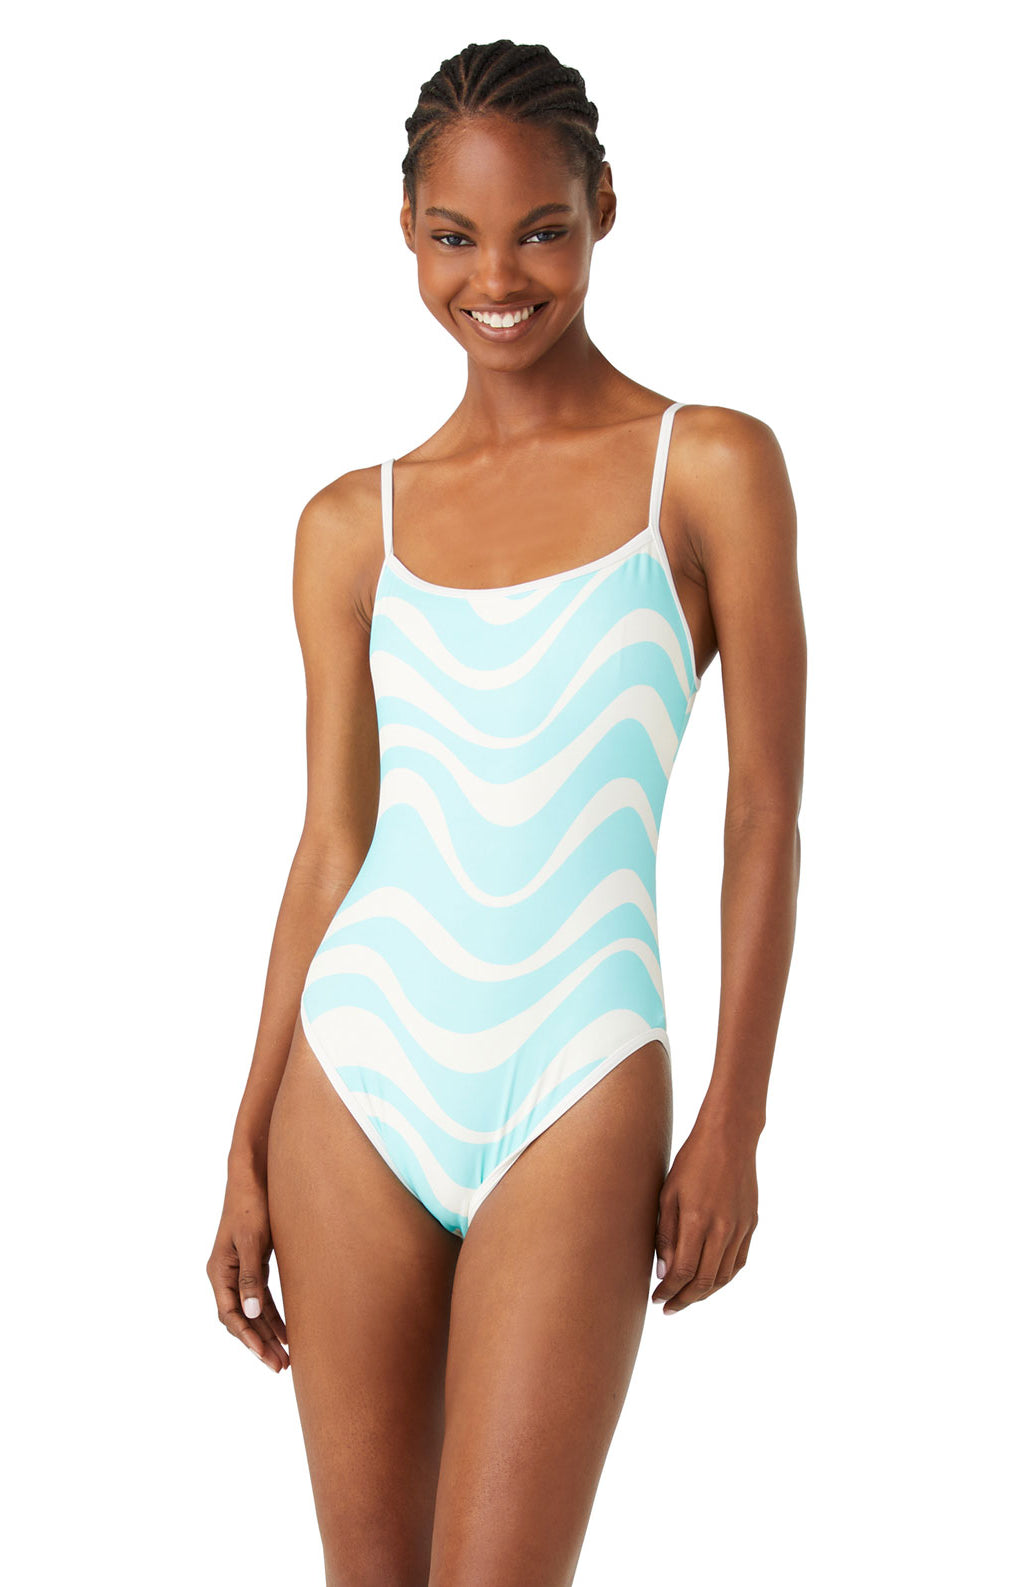 Kate Spade: One Piece Wave Classic Swimsuit